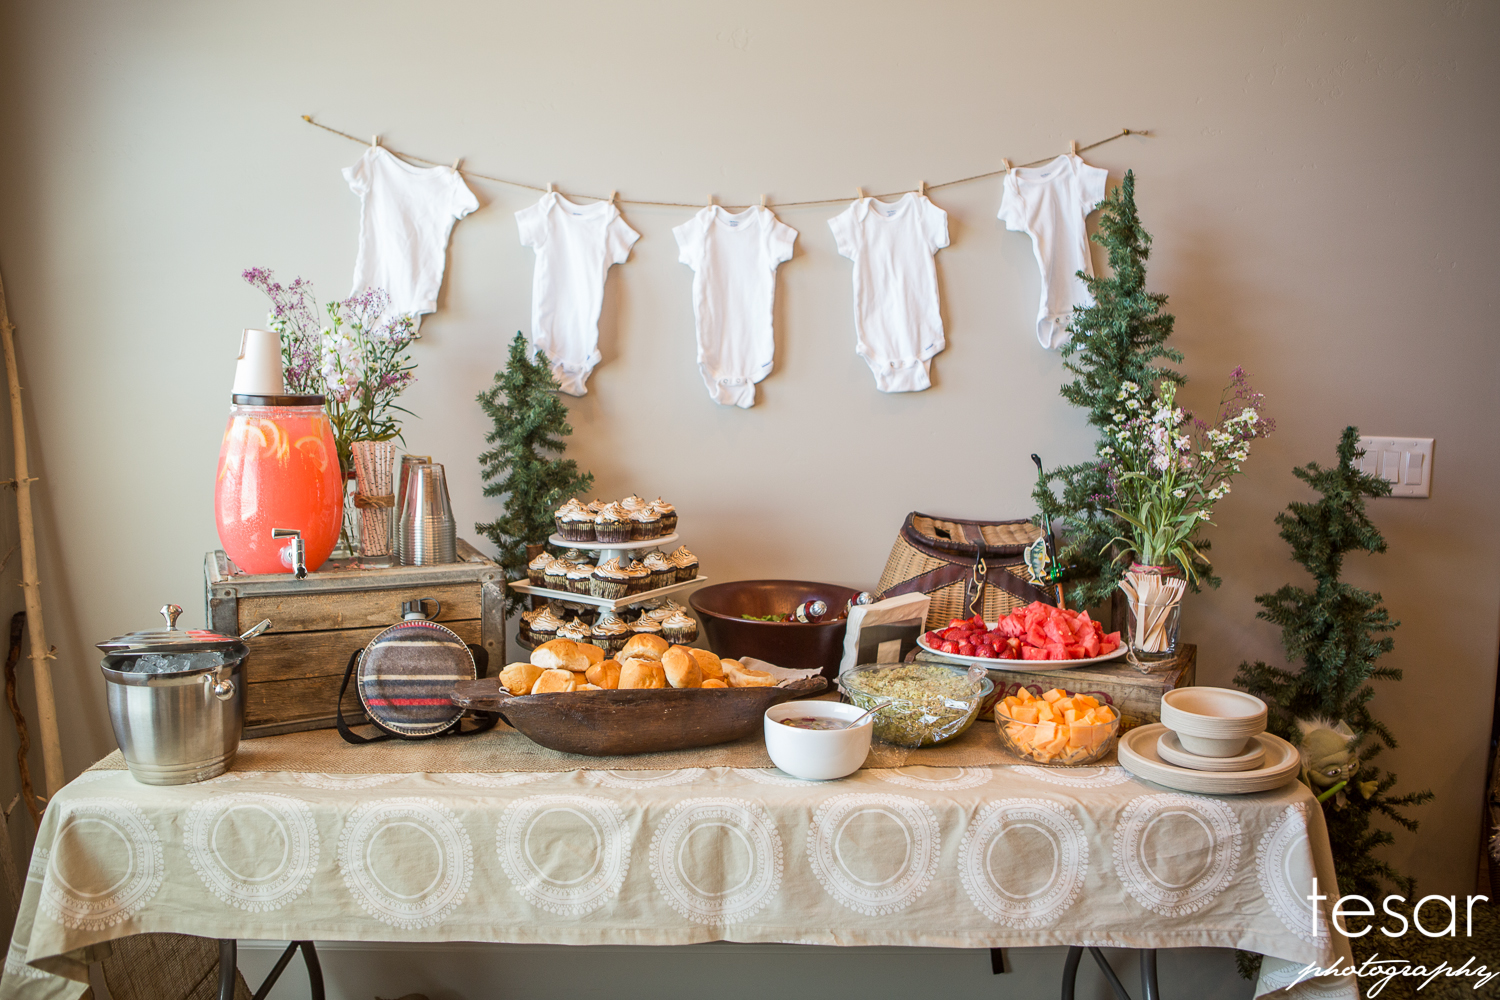 Camping Themed Baby Shower-1000